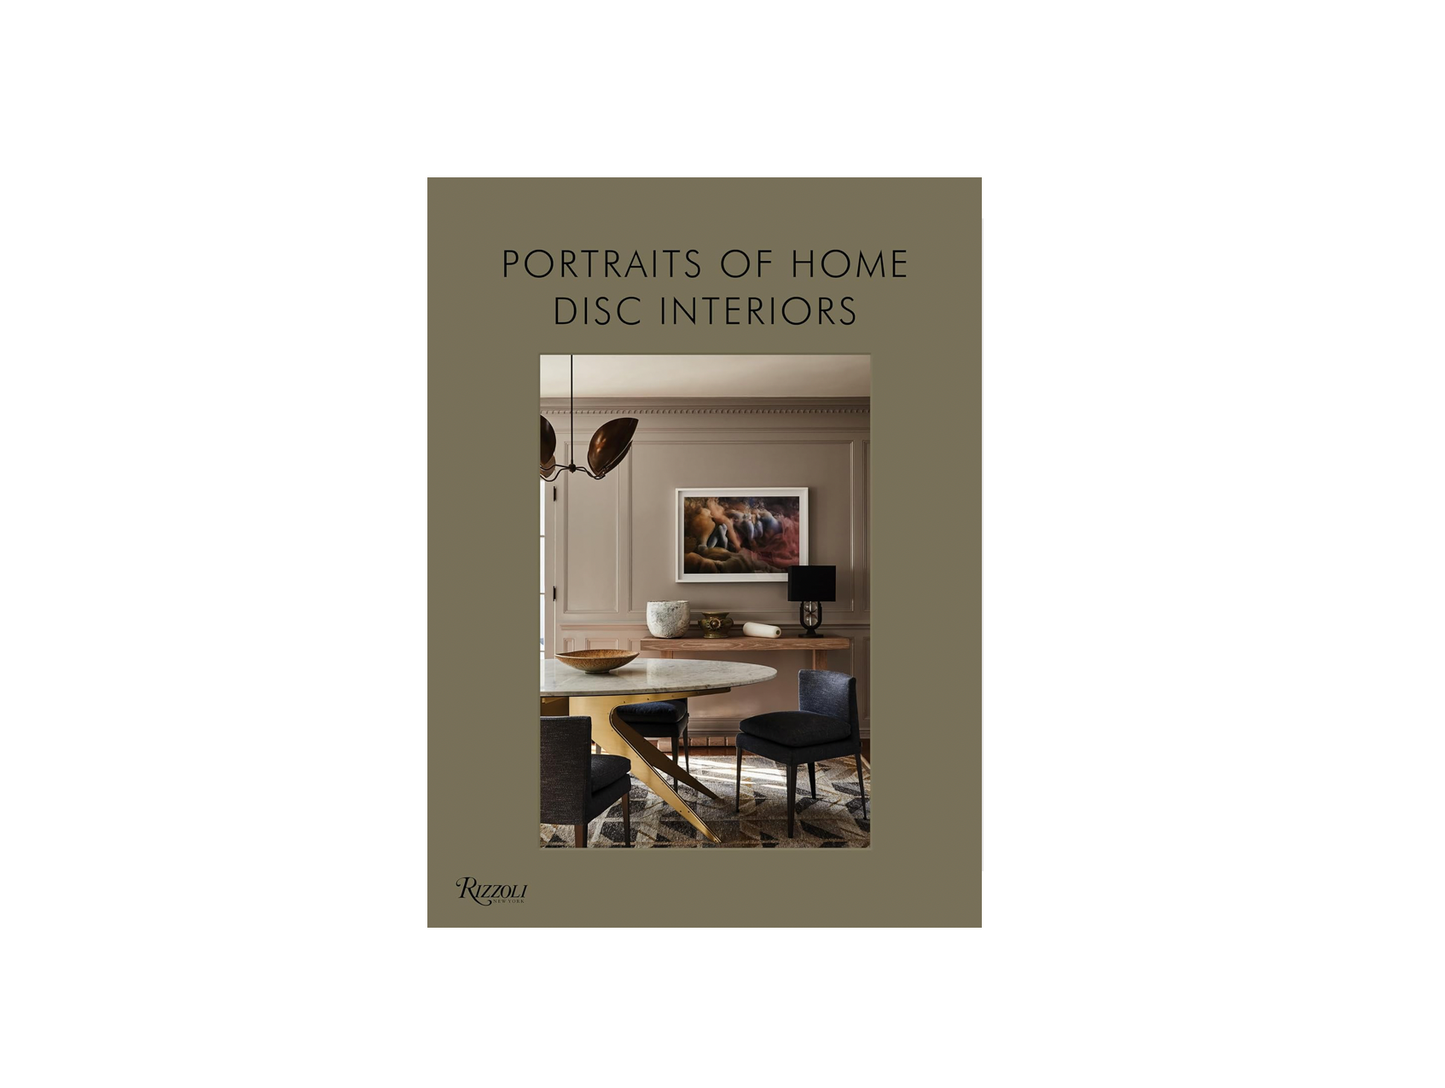 Portraits of Home by Disc Interiors